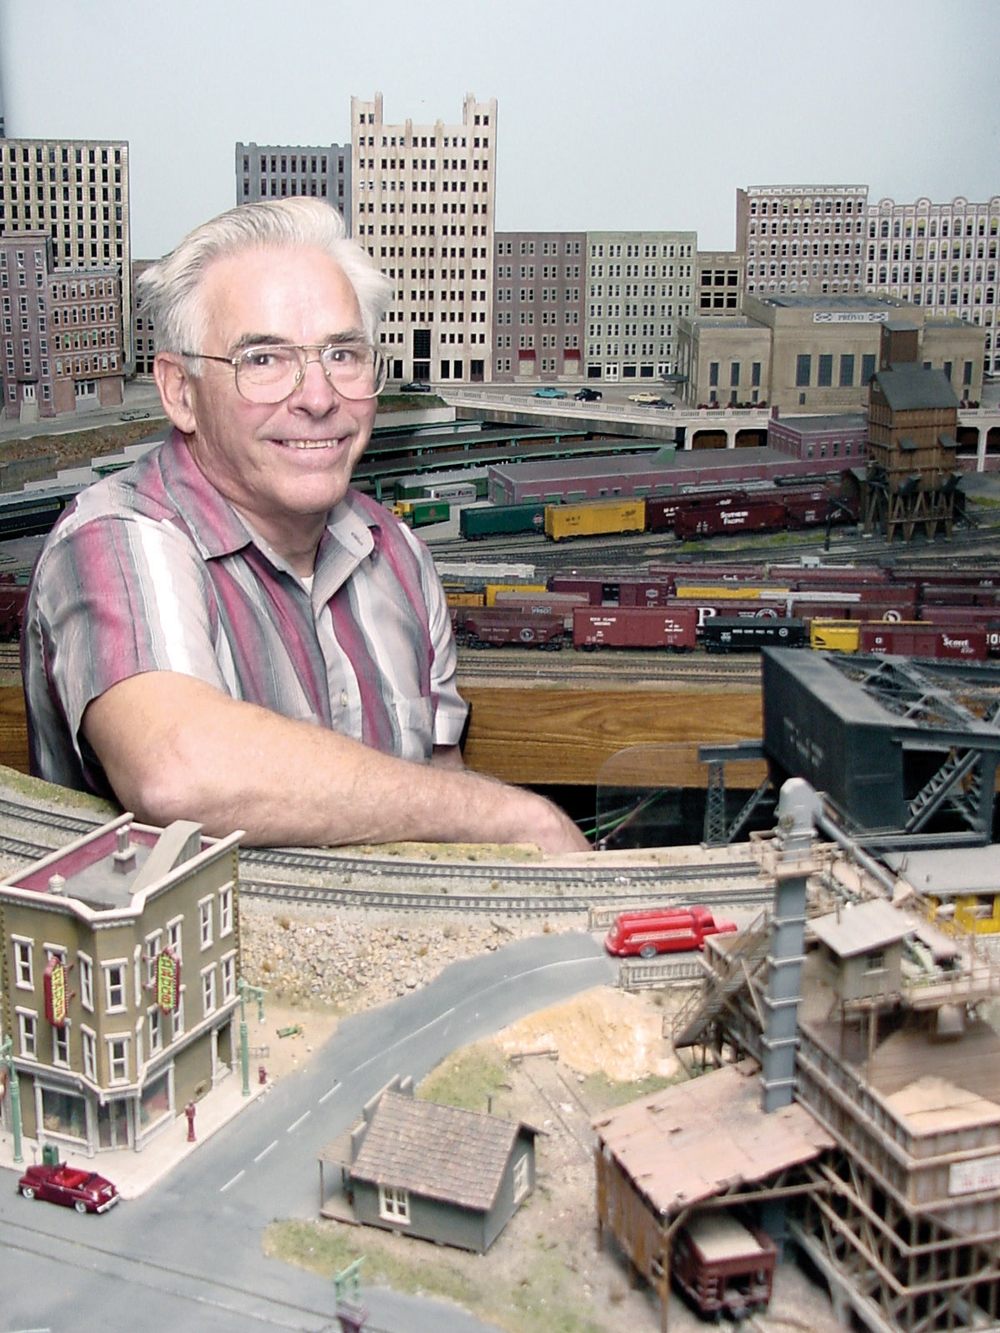 model railroaders we lost in 2022: a picture of a man by his layout